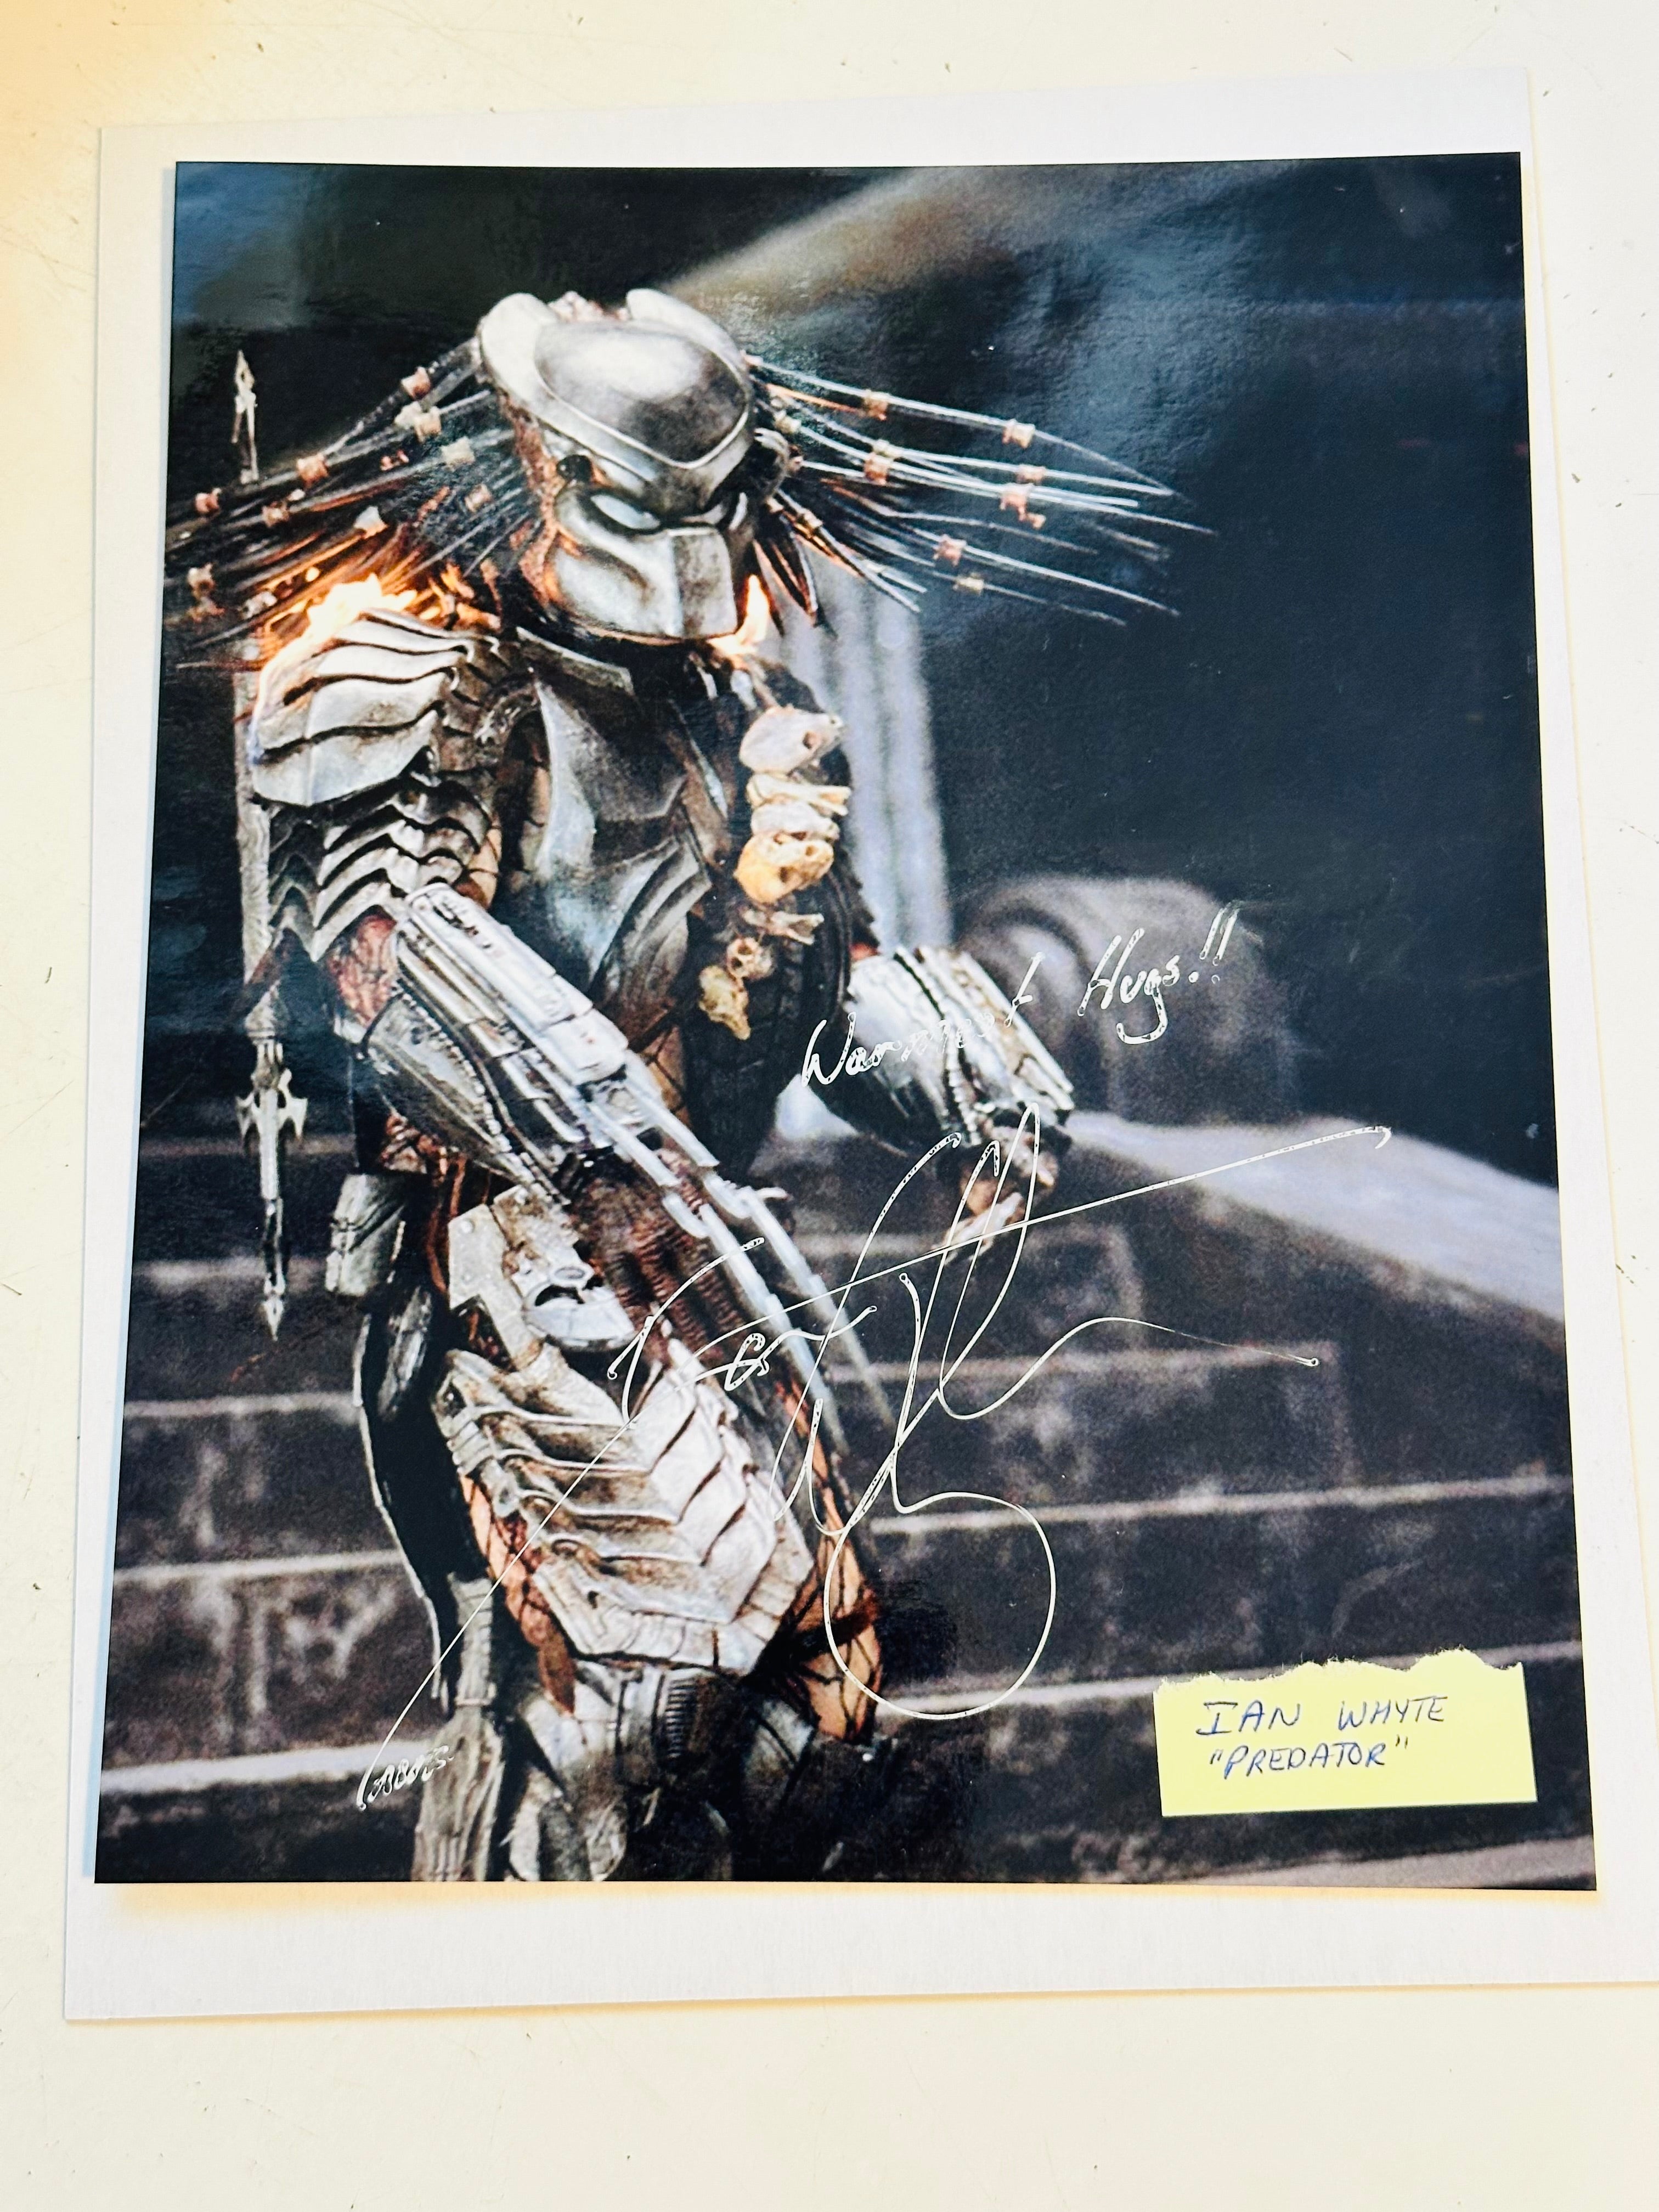 Predator movie autograph signed by Ian Whyte sold with COA